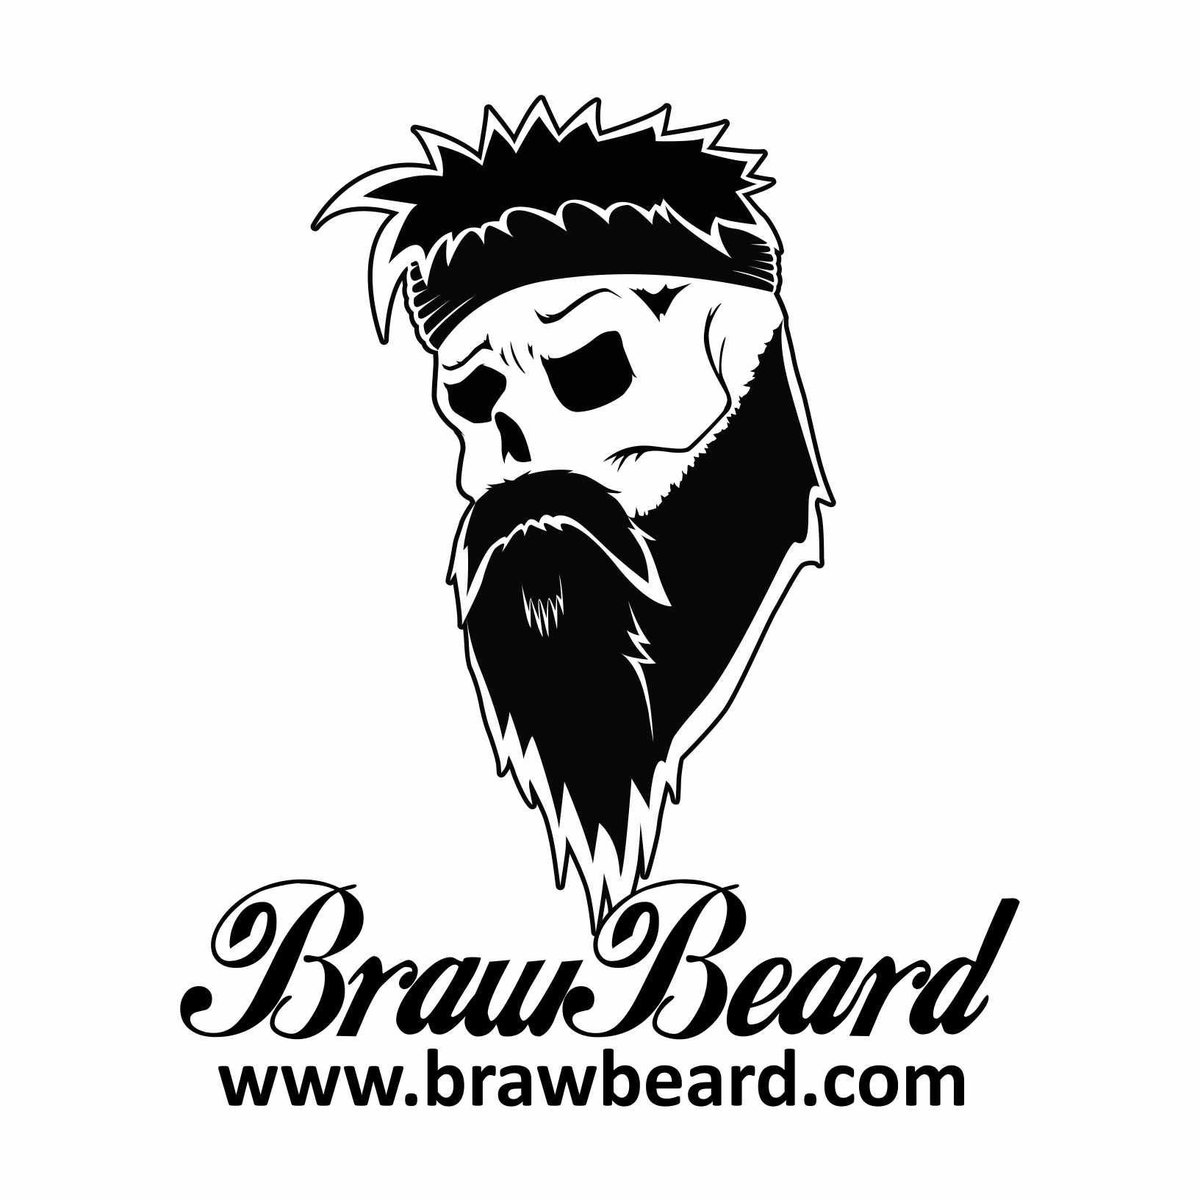 Discount code for ‘free shipping ‘you all 👍🏼 From the lads @BrawBeardOil 😎